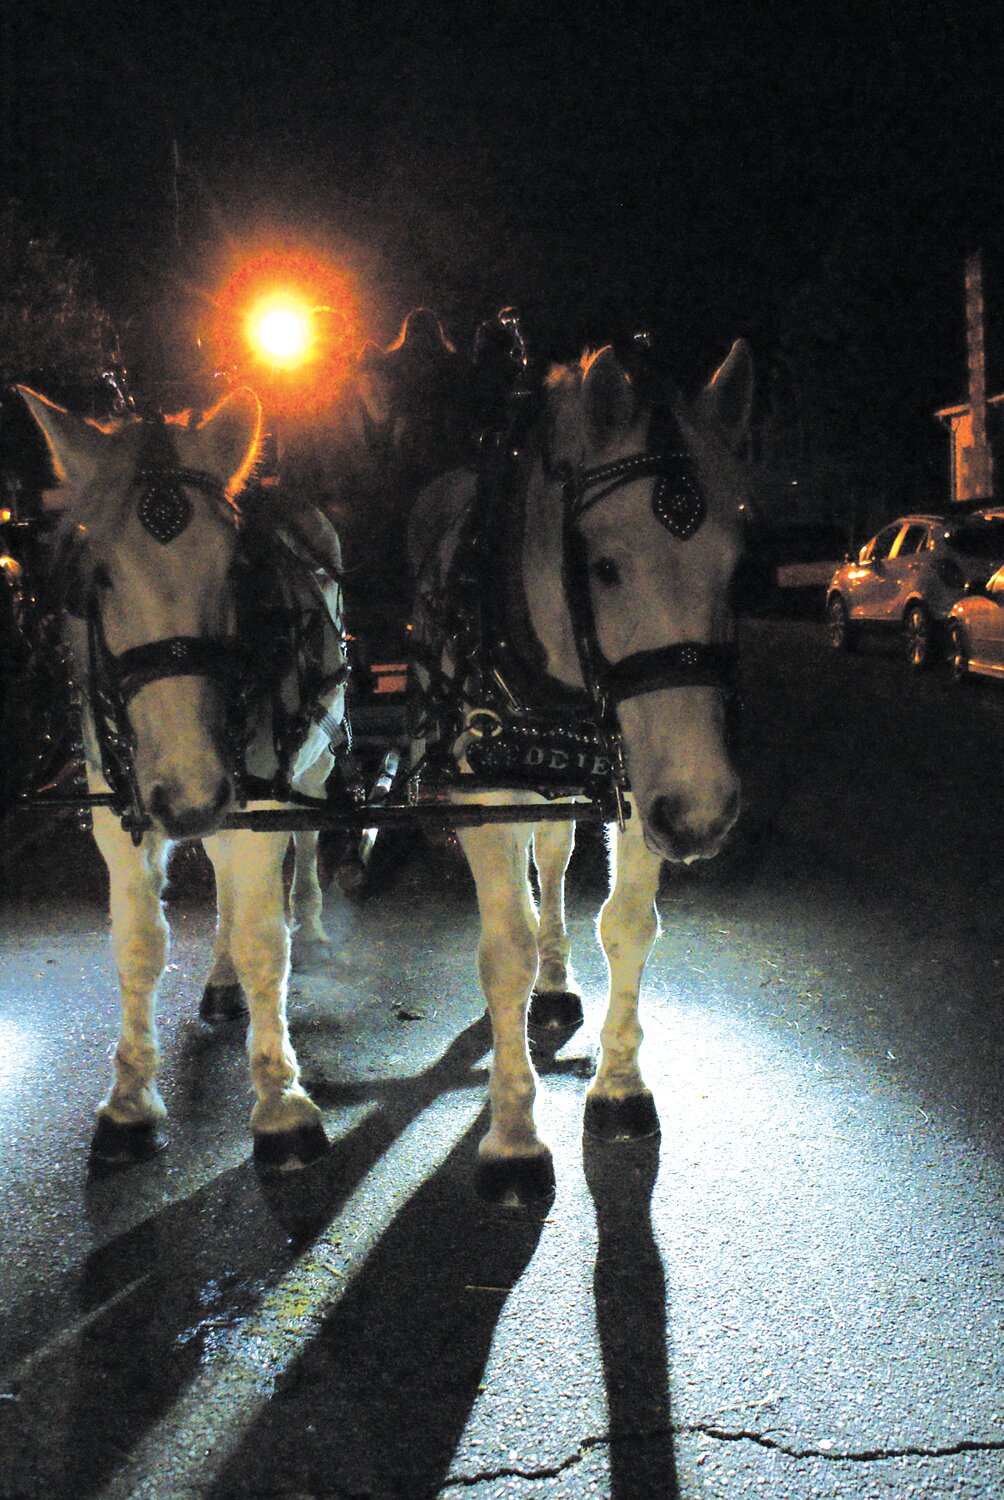 EQUINE TOUR GUIDES: Carriage horses Lenny and Eddie from New Deal Horse & Carriage in North Kingstown usher visitors around the lights. (Photo by Steve Popiel)